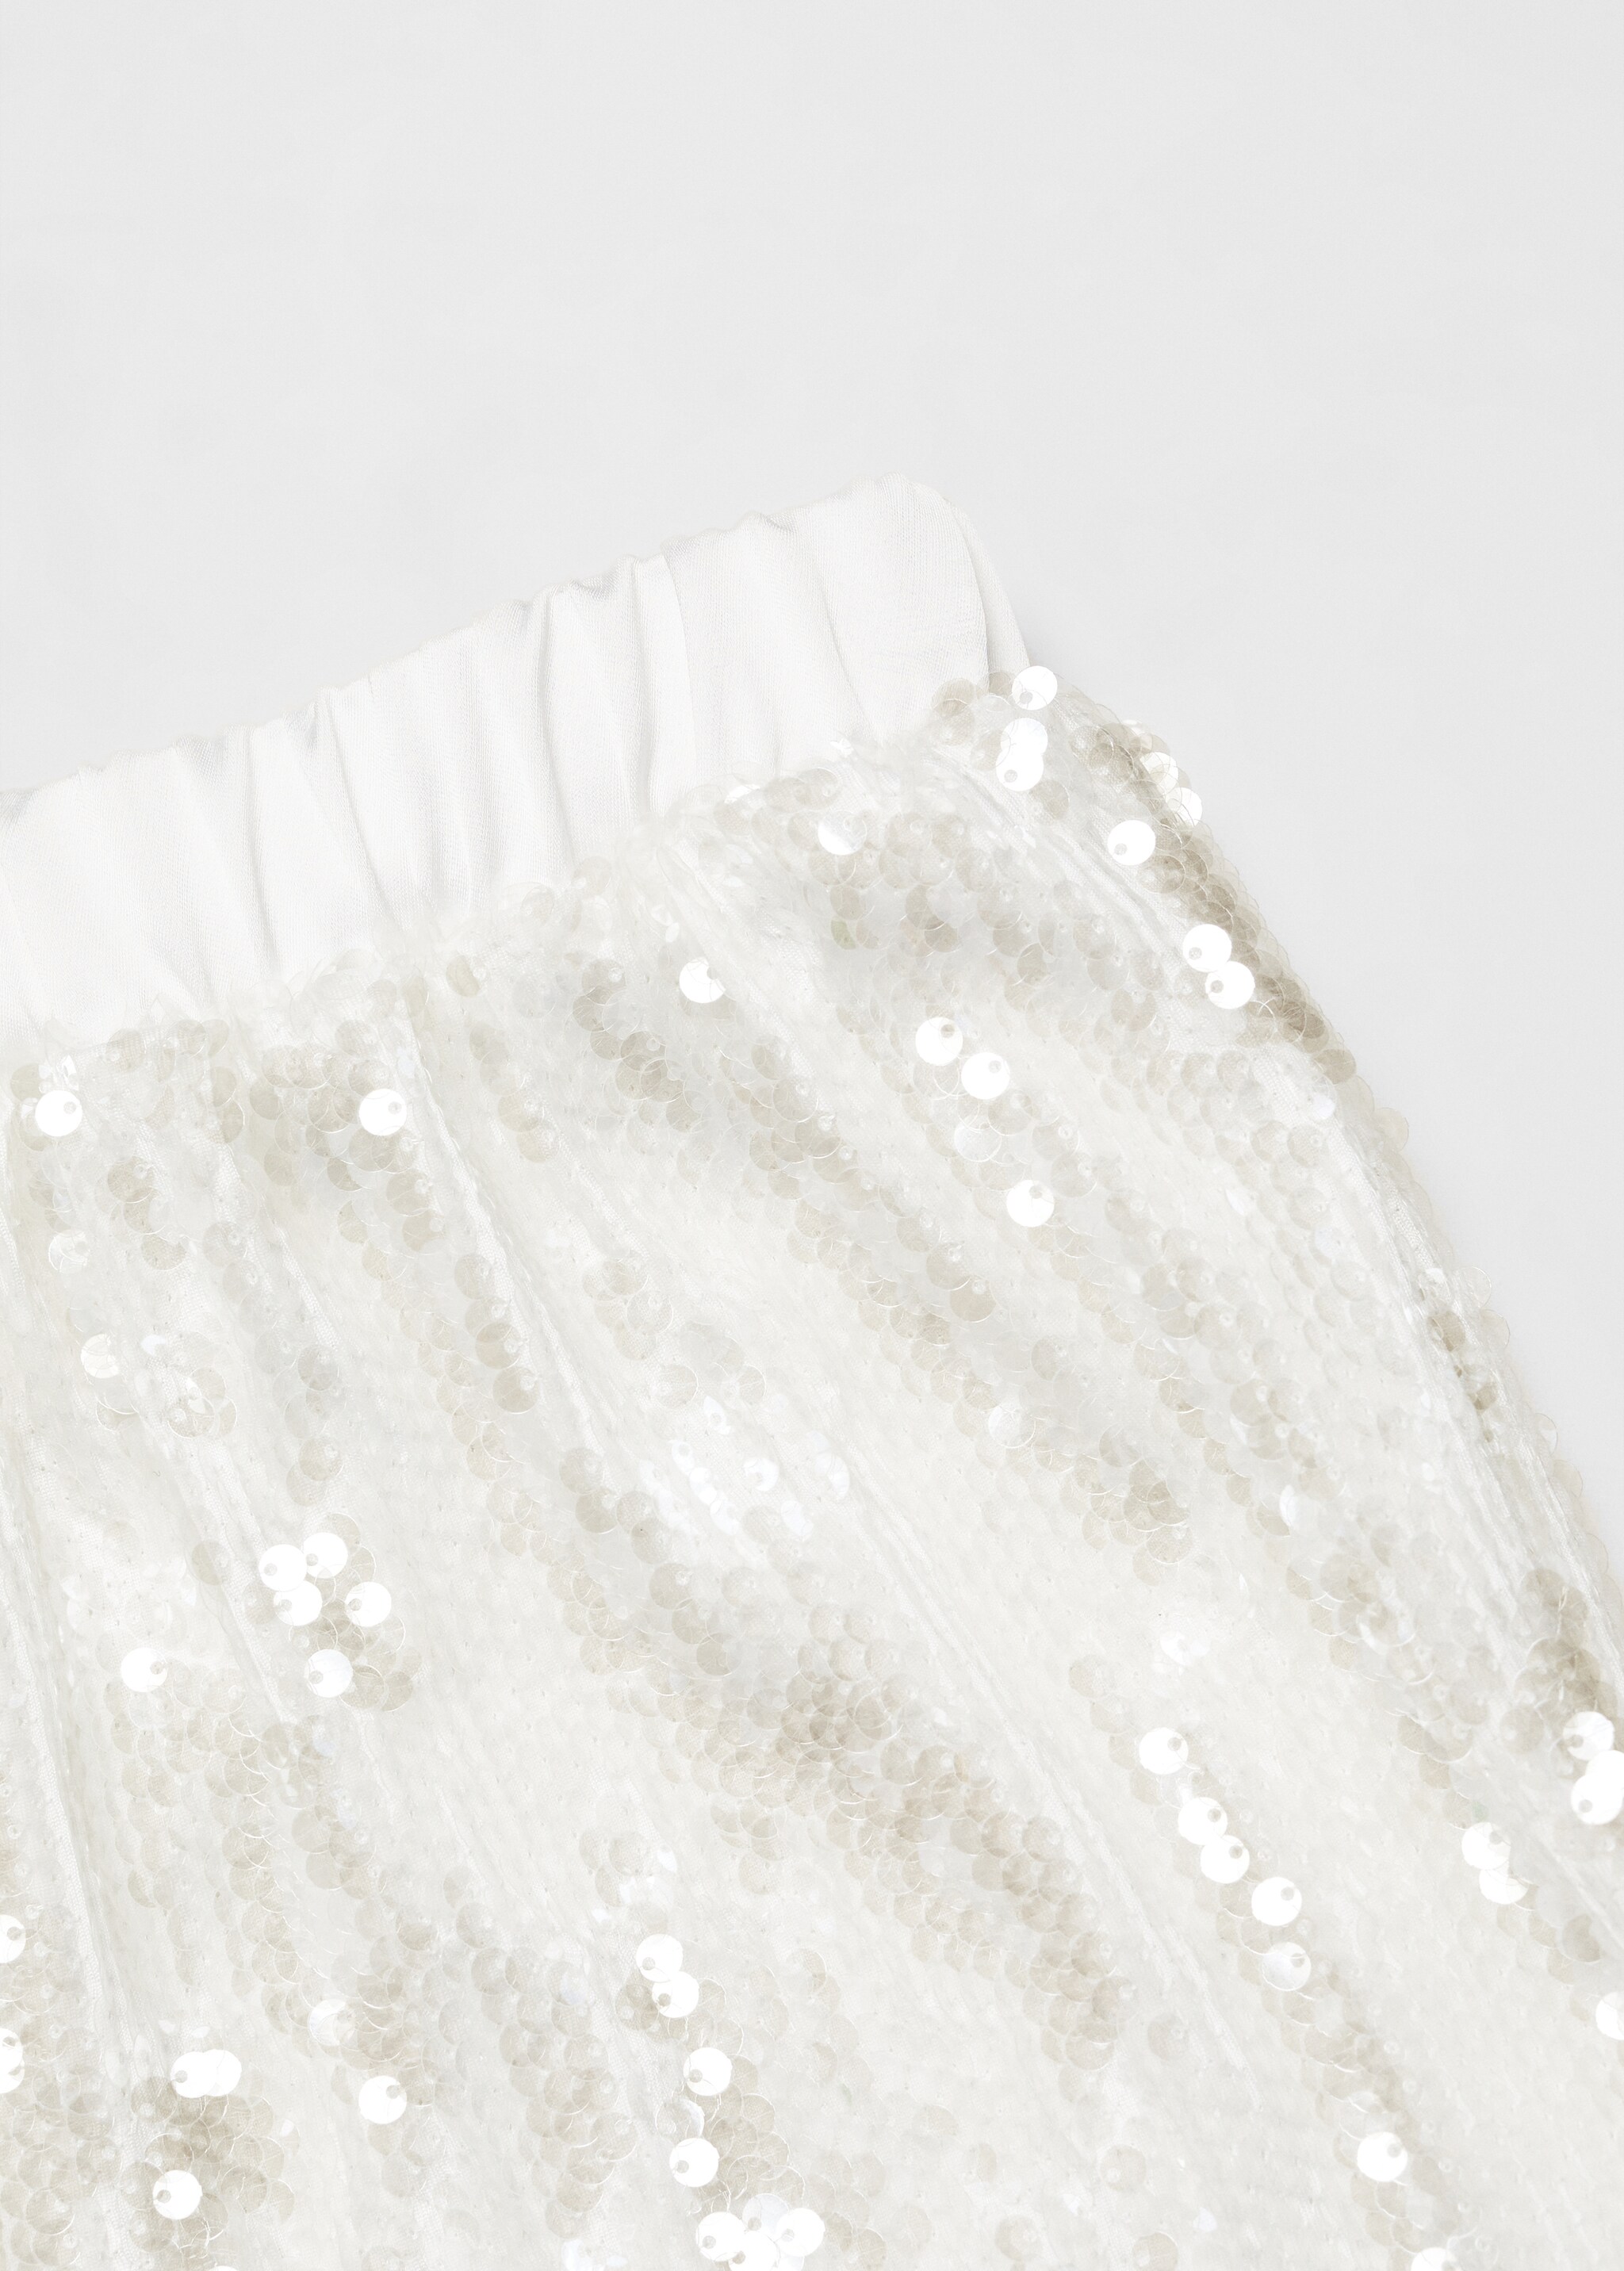 Short sequins - Details of the article 8